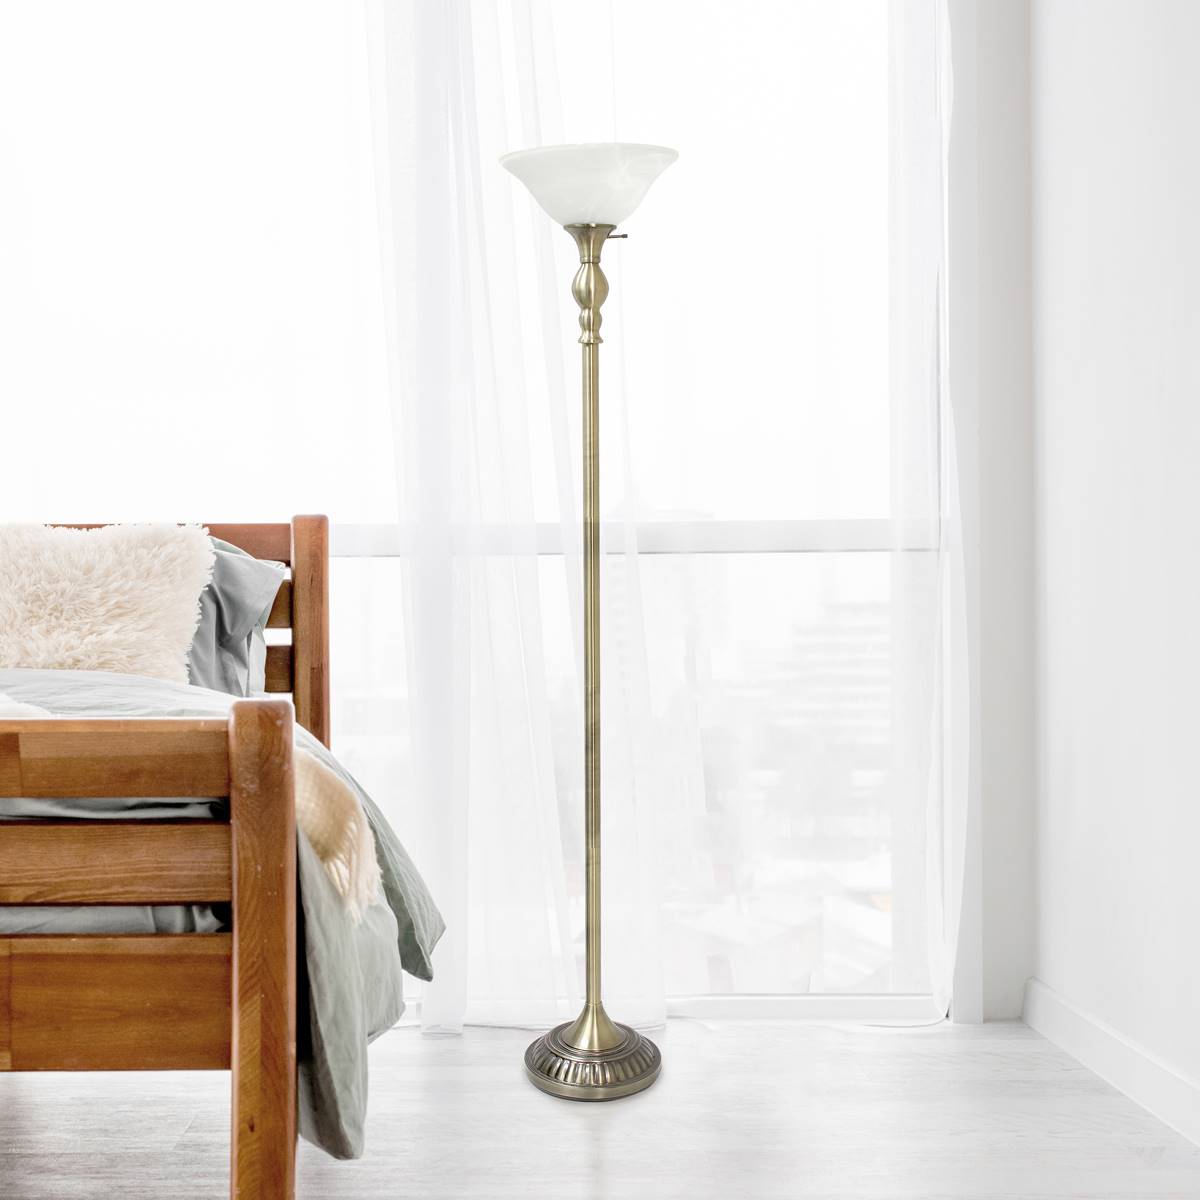 Lalia Home Classic 1 Light Marbleized Glass Torchiere Floor Lamp